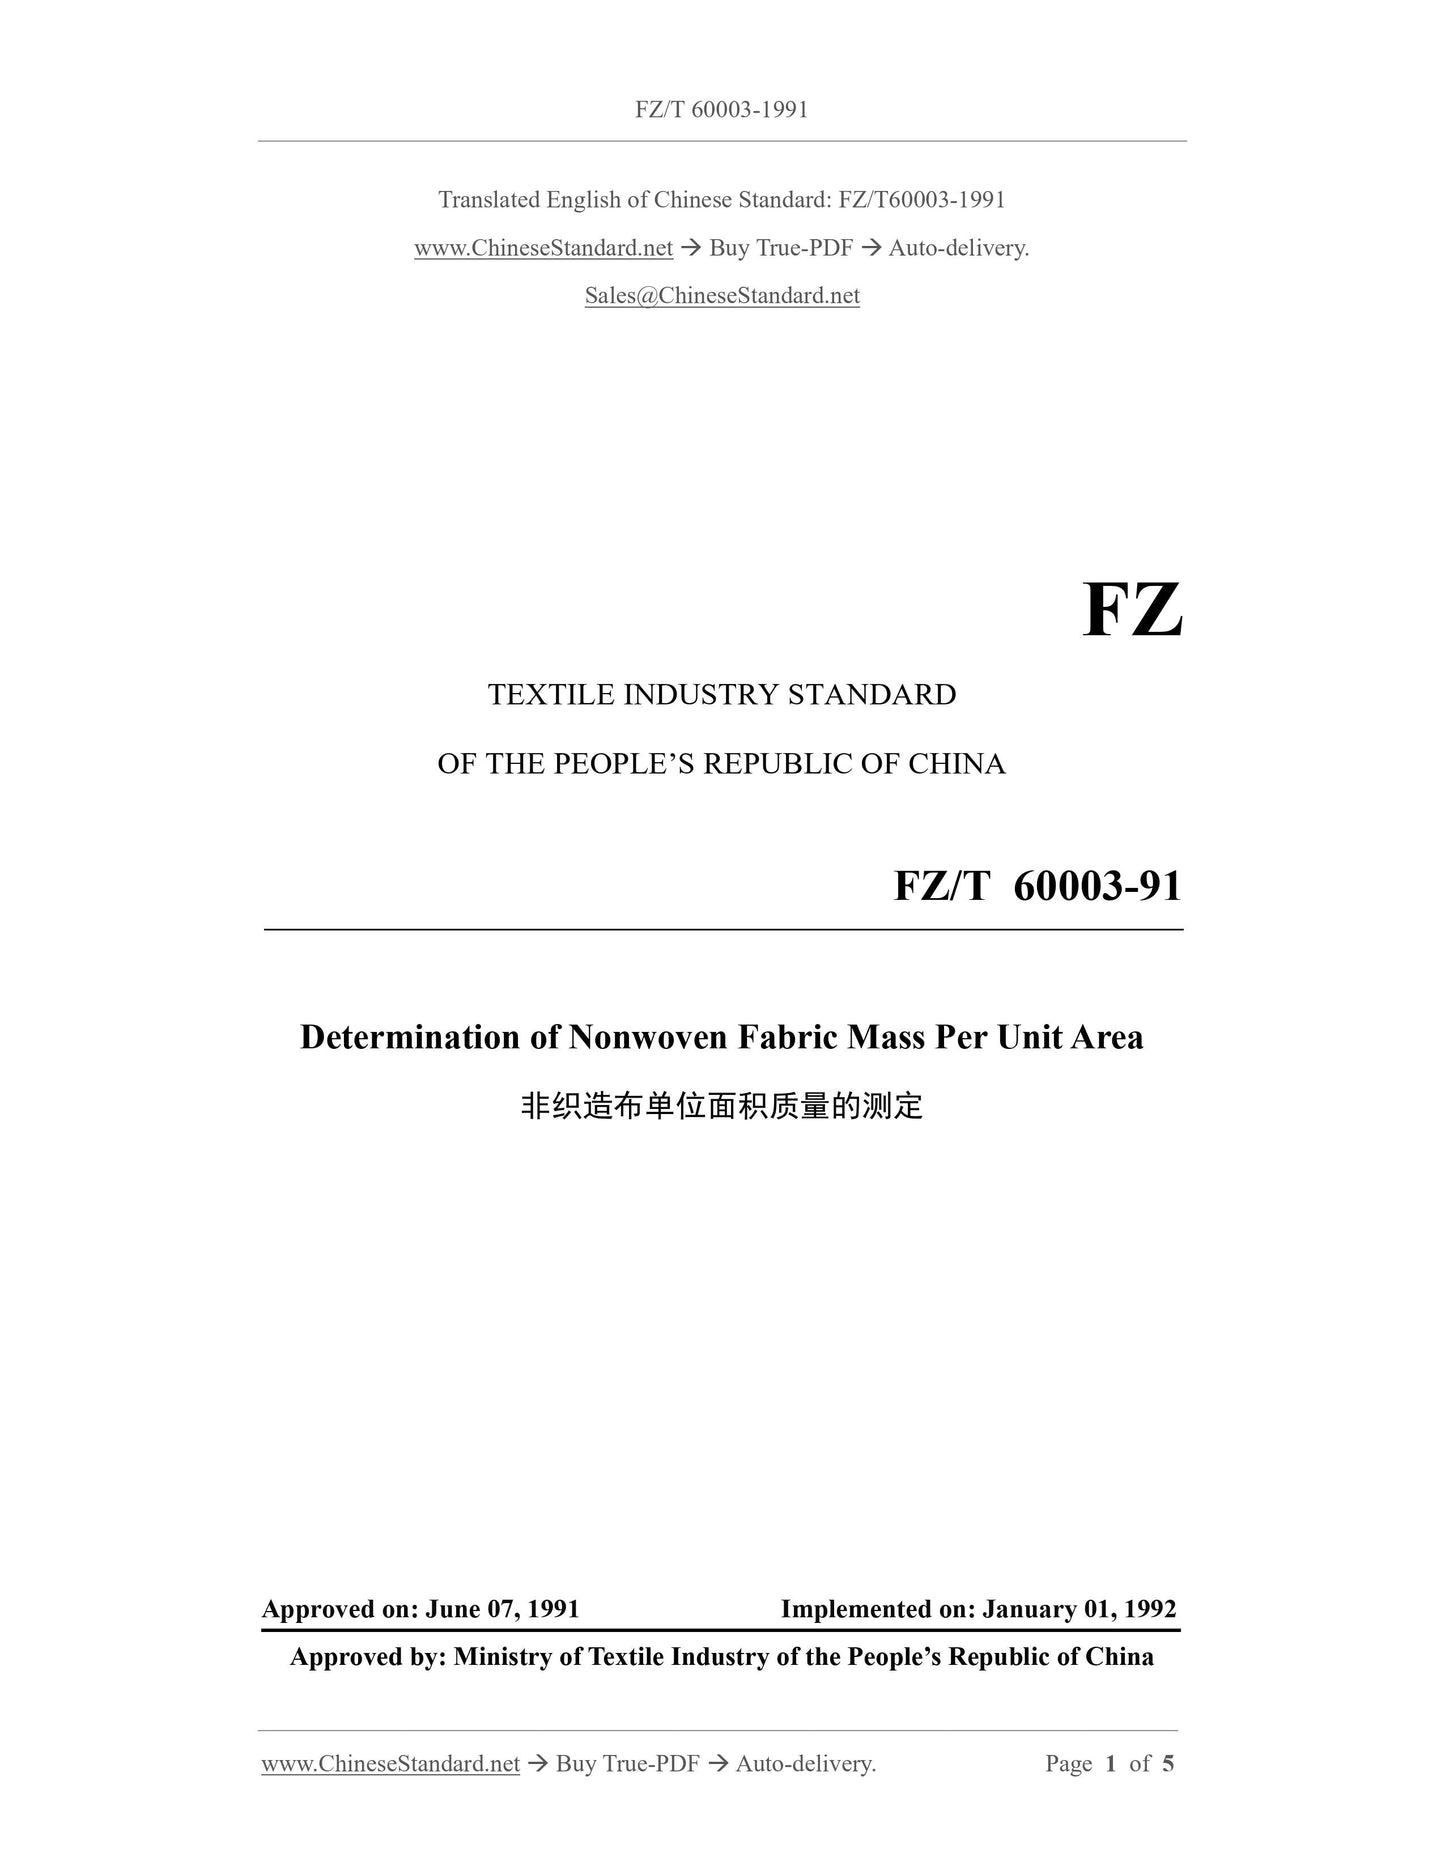 FZ/T 60003-1991 Page 1